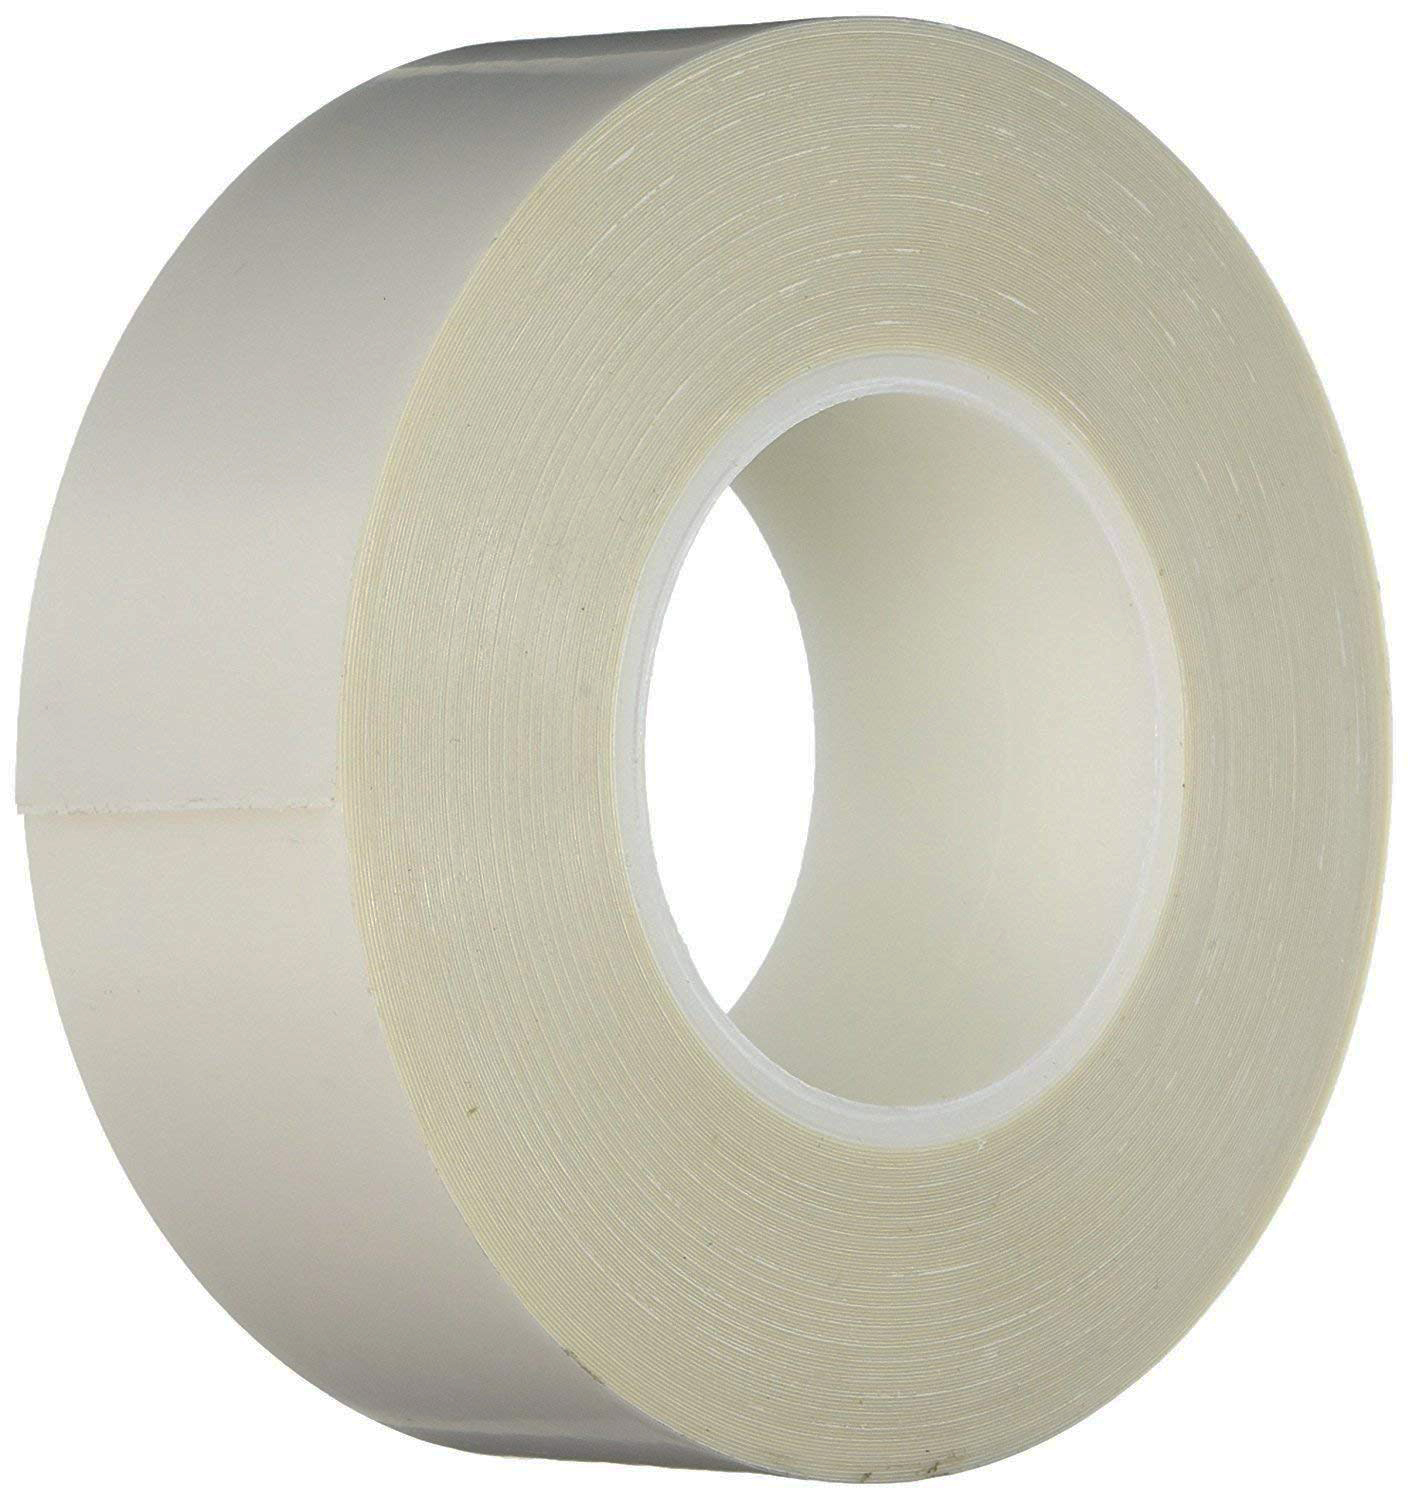 .010 x 1.5IN NATURAL UHMW P/S TAPE - UHMW Tapes